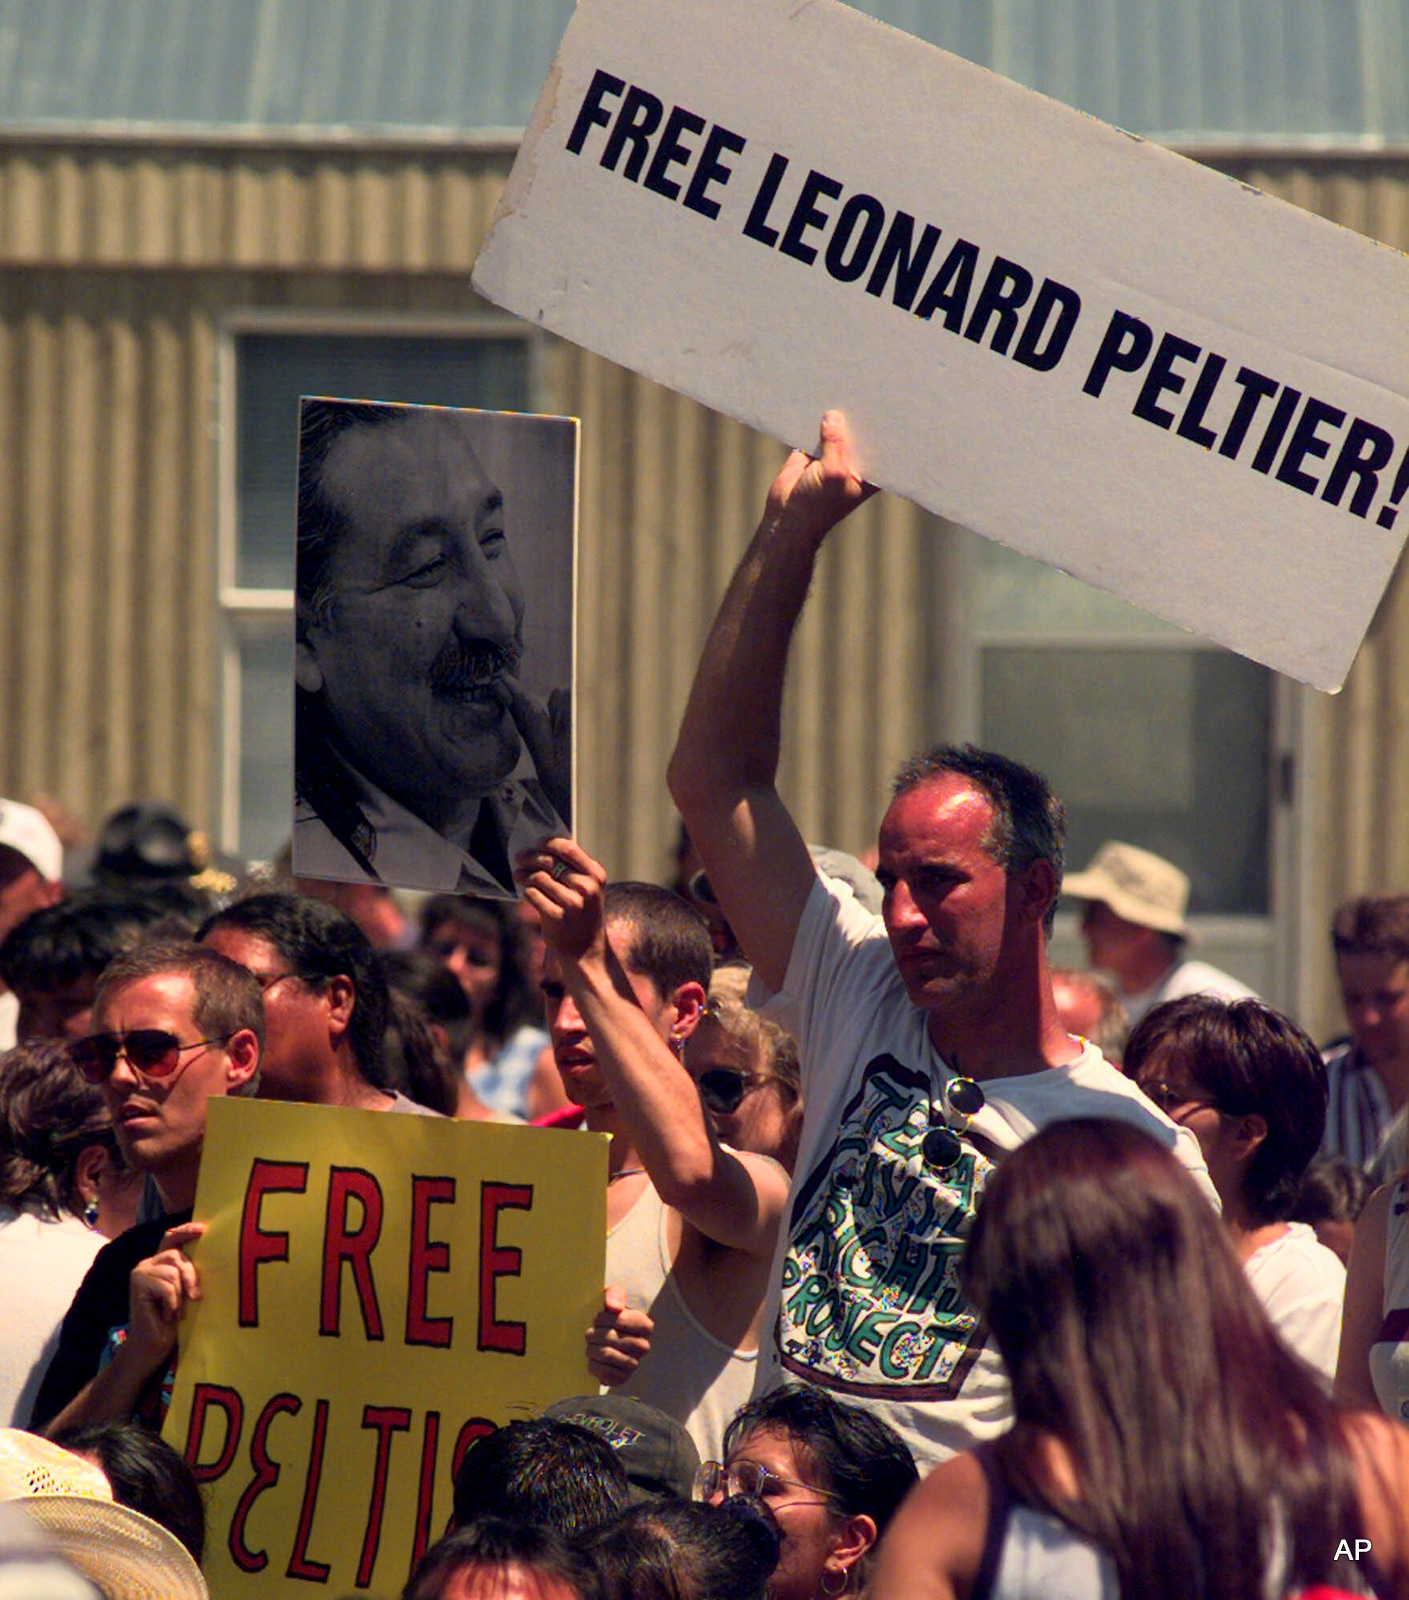 A group of protesters raise signs and a photo in support of Leonard Peltier during President Clinton's speech Wednesday, July 7, 1999 at Pine Ridge High School in Pine Ridge, S.D., on the Pine Ridge Indian Reservation